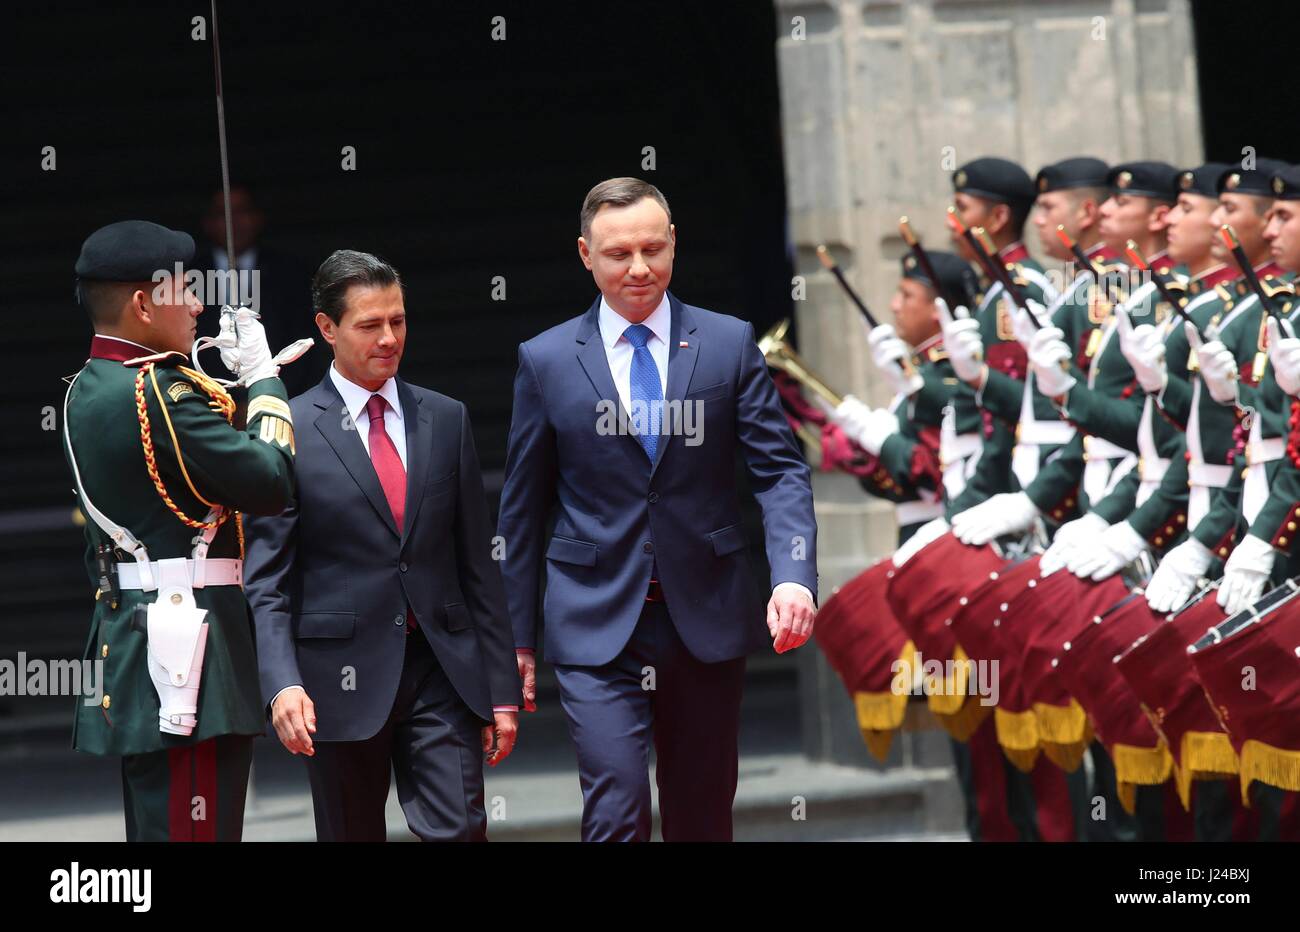 Mexico City, Mexico. 24th April, 2017. Mexican President Enrique Pena Nieto, left, escorts Polish President Andrzej Duda for a review of the honor guard during the formal arrival ceremony at the national palace April 24, 2017 in Mexico City, Mexico. Credit: Planetpix/Alamy Live News Stock Photo